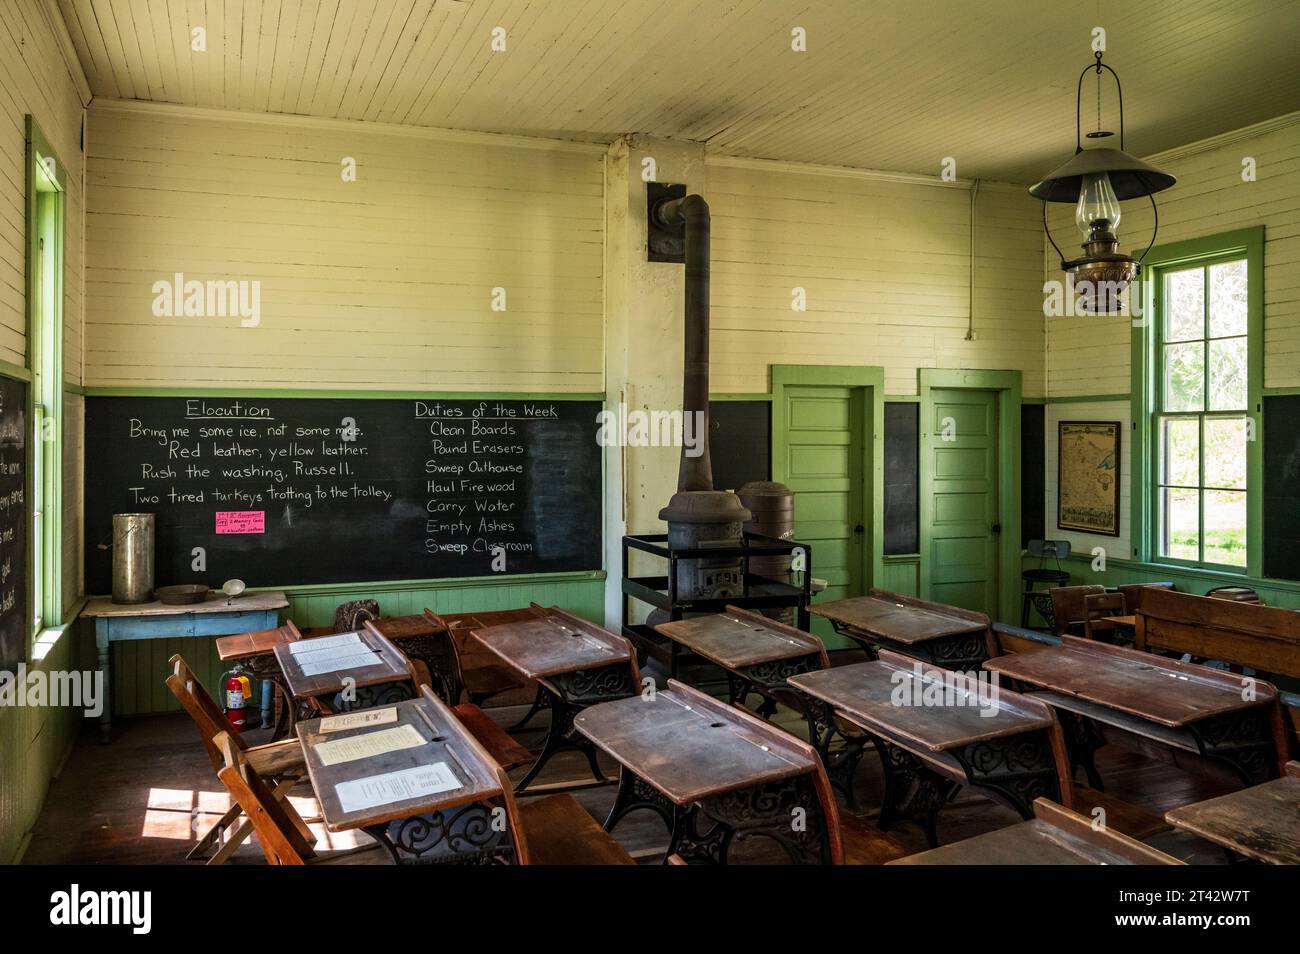 School Room of Old One Room Schoolhouse nel Minnesota presso la Olmsted County Historical Society di Rochester Foto Stock